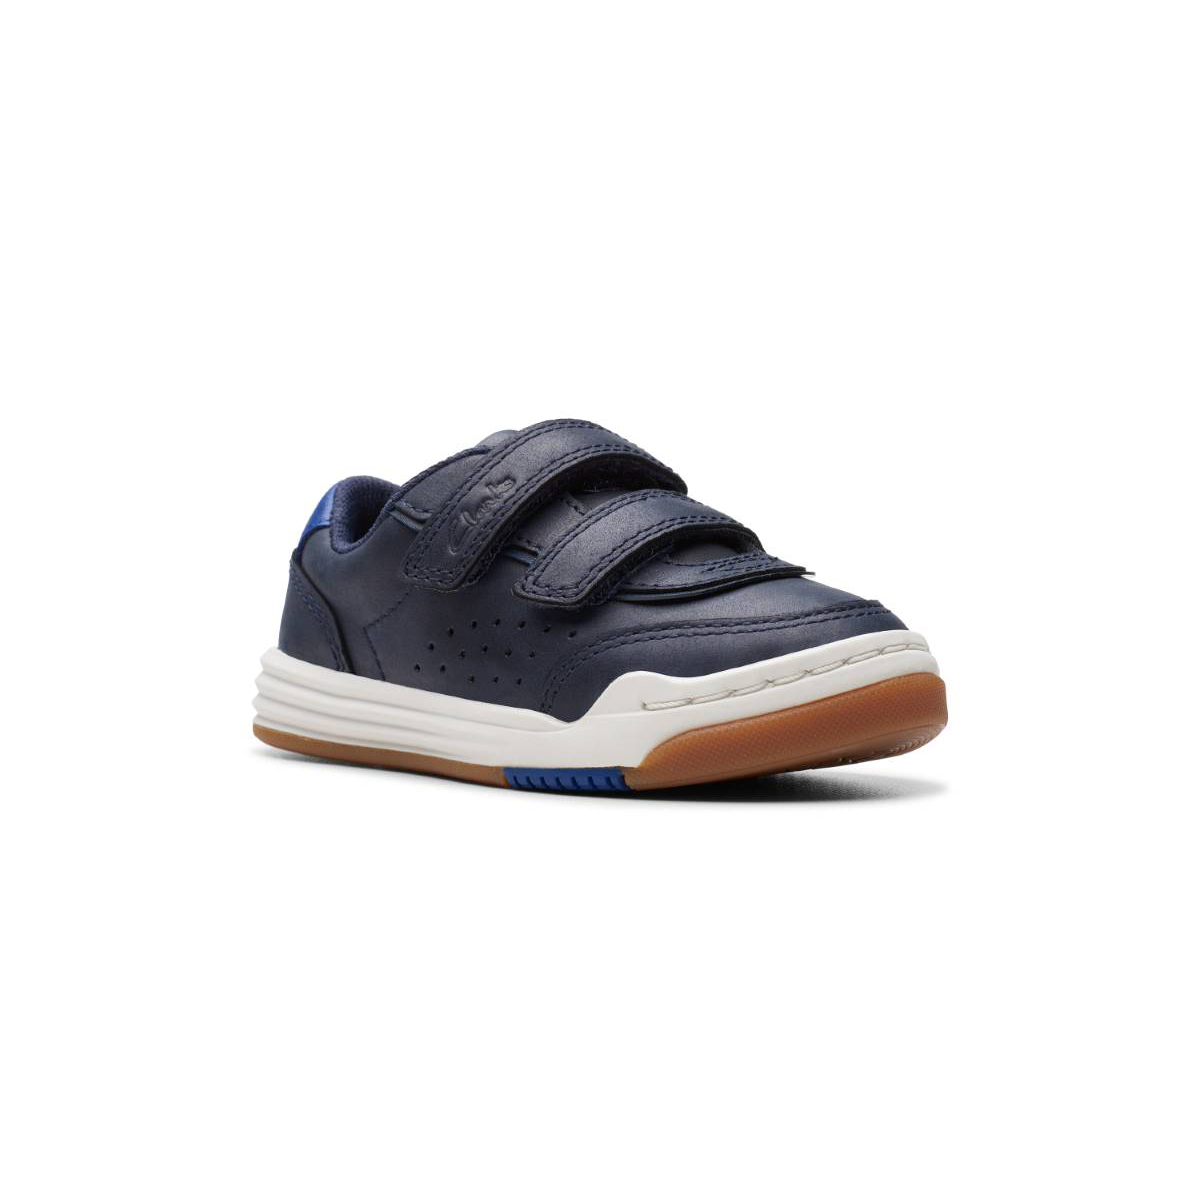 Clarks Urban Solo T Navy Leather Kids Boys Toddler Shoes 7666-46F in a Plain Leather in Size 6.5